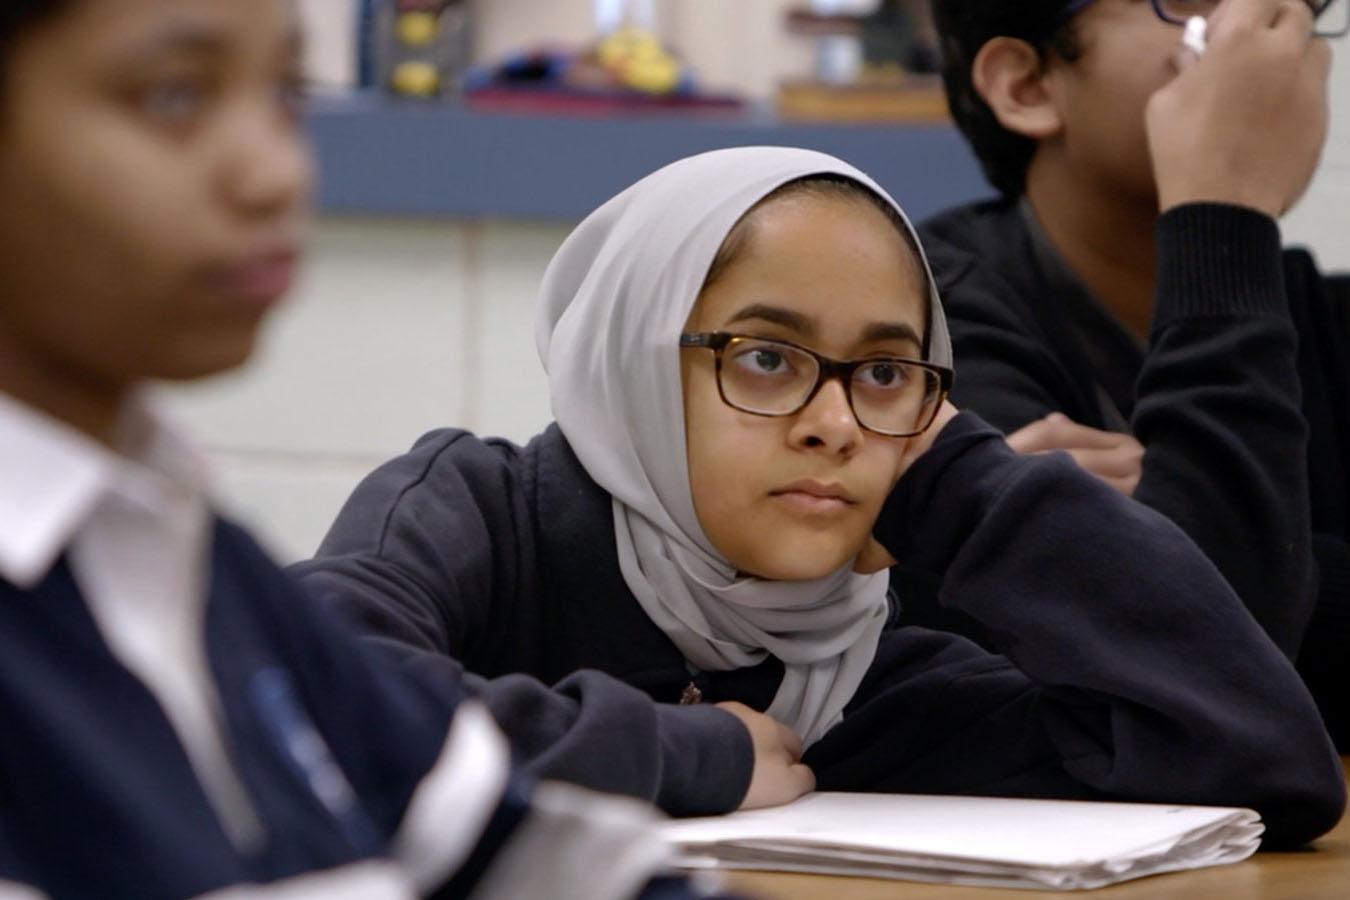 TV review: 14 & Muslim is a charming profile of three teens